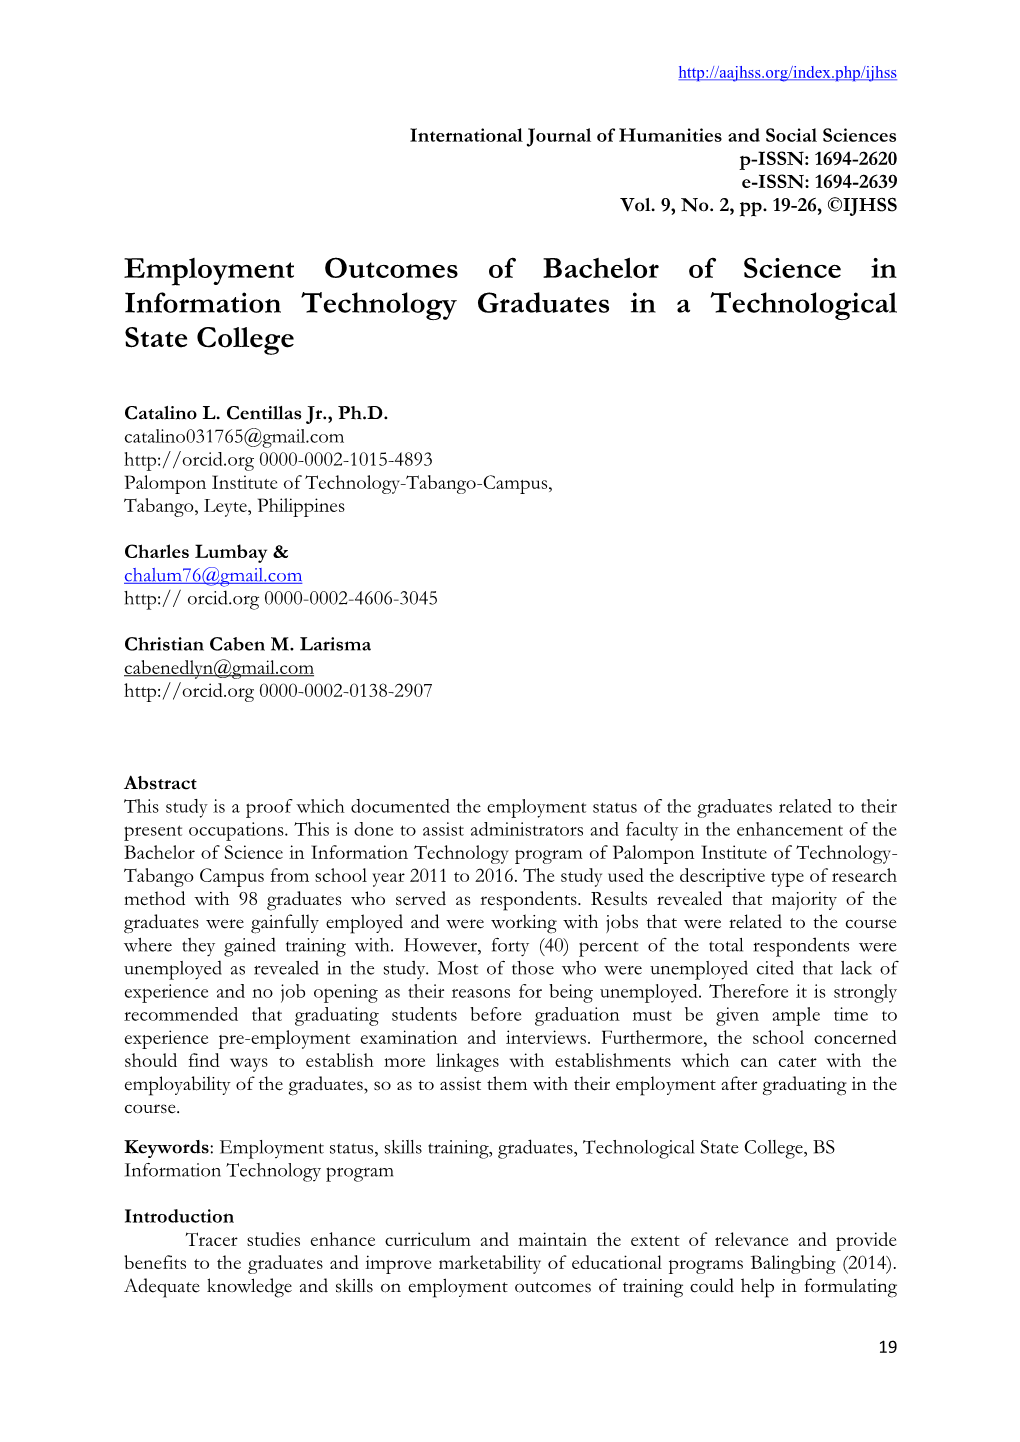 Employment Outcomes of Bachelor of Science in Information Technology Graduates in a Technological State College